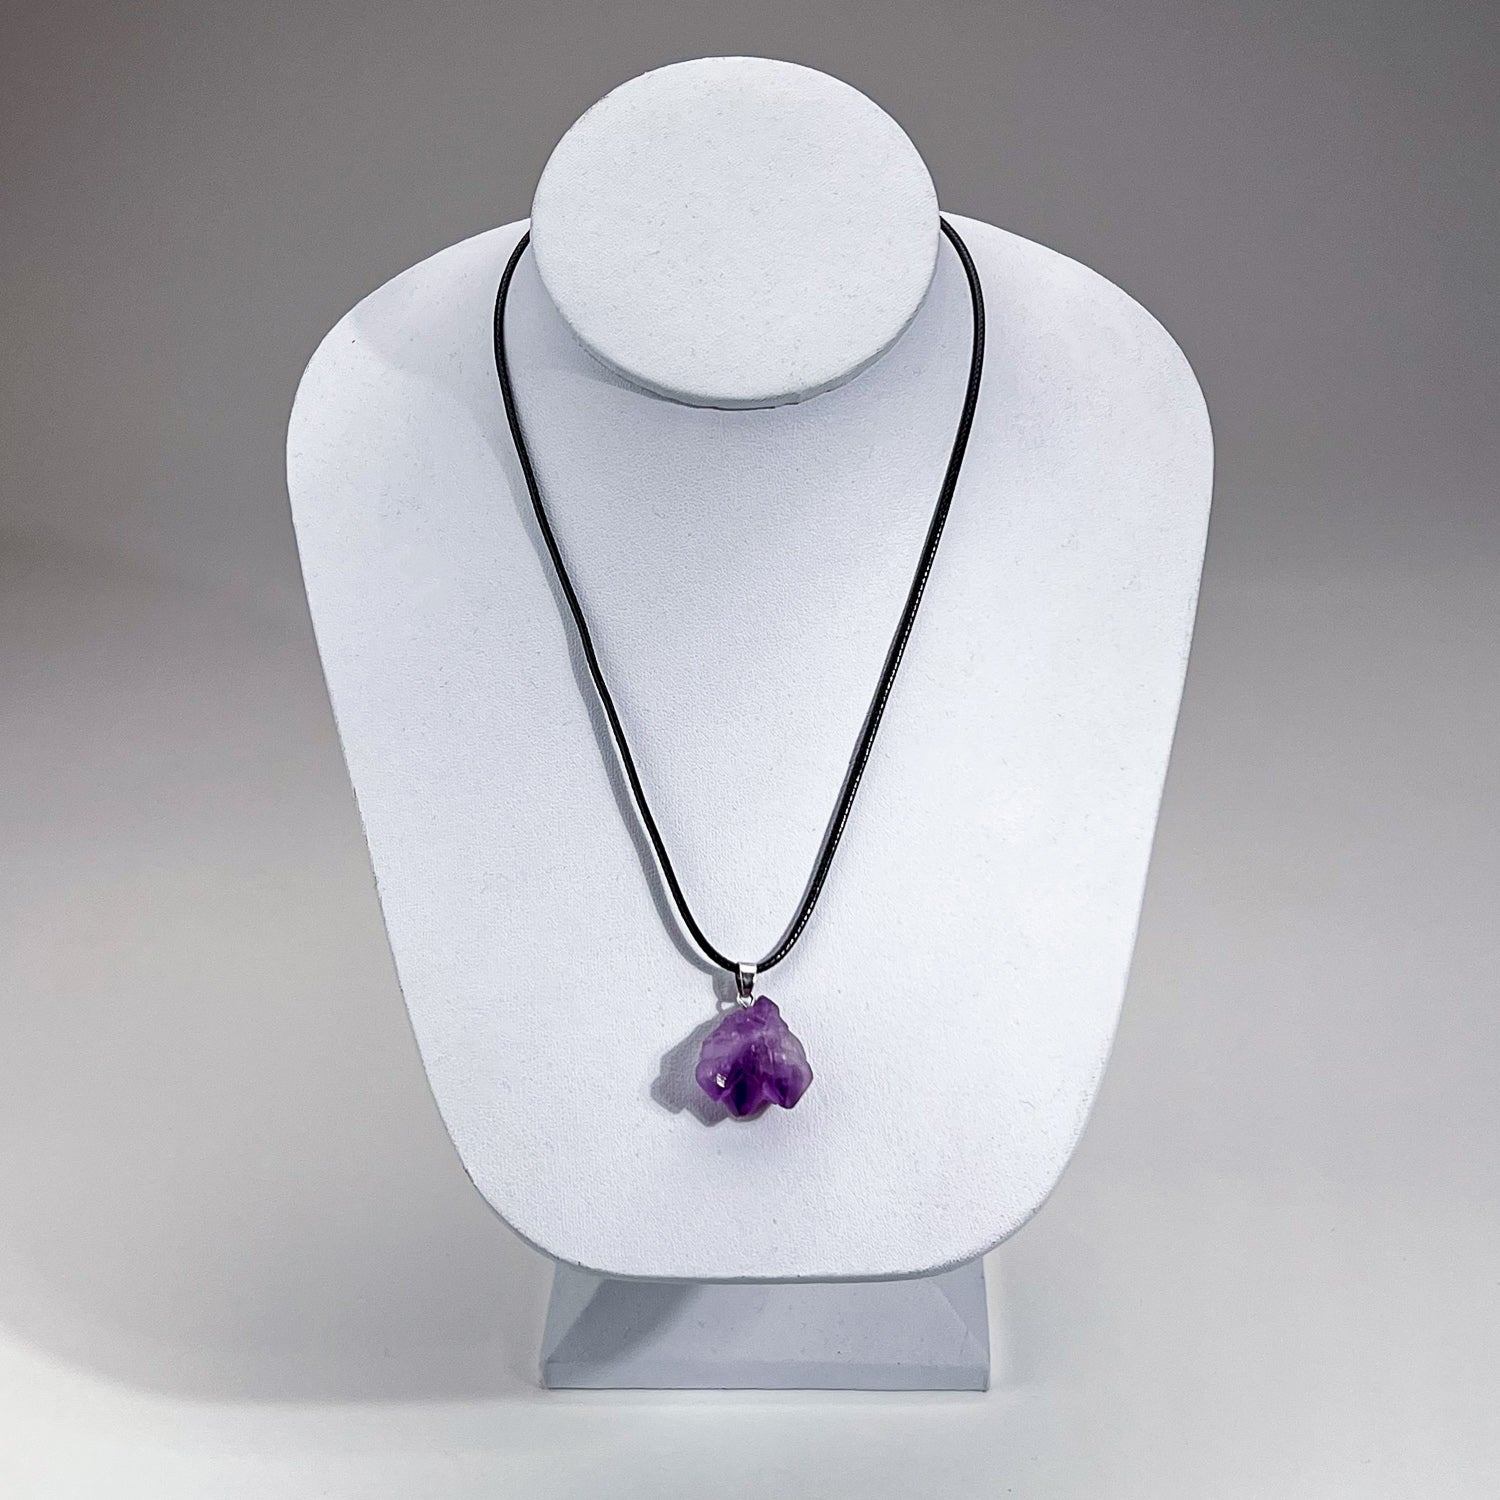 Genuine Amethyst Pendant with Adjustable Cord Necklace